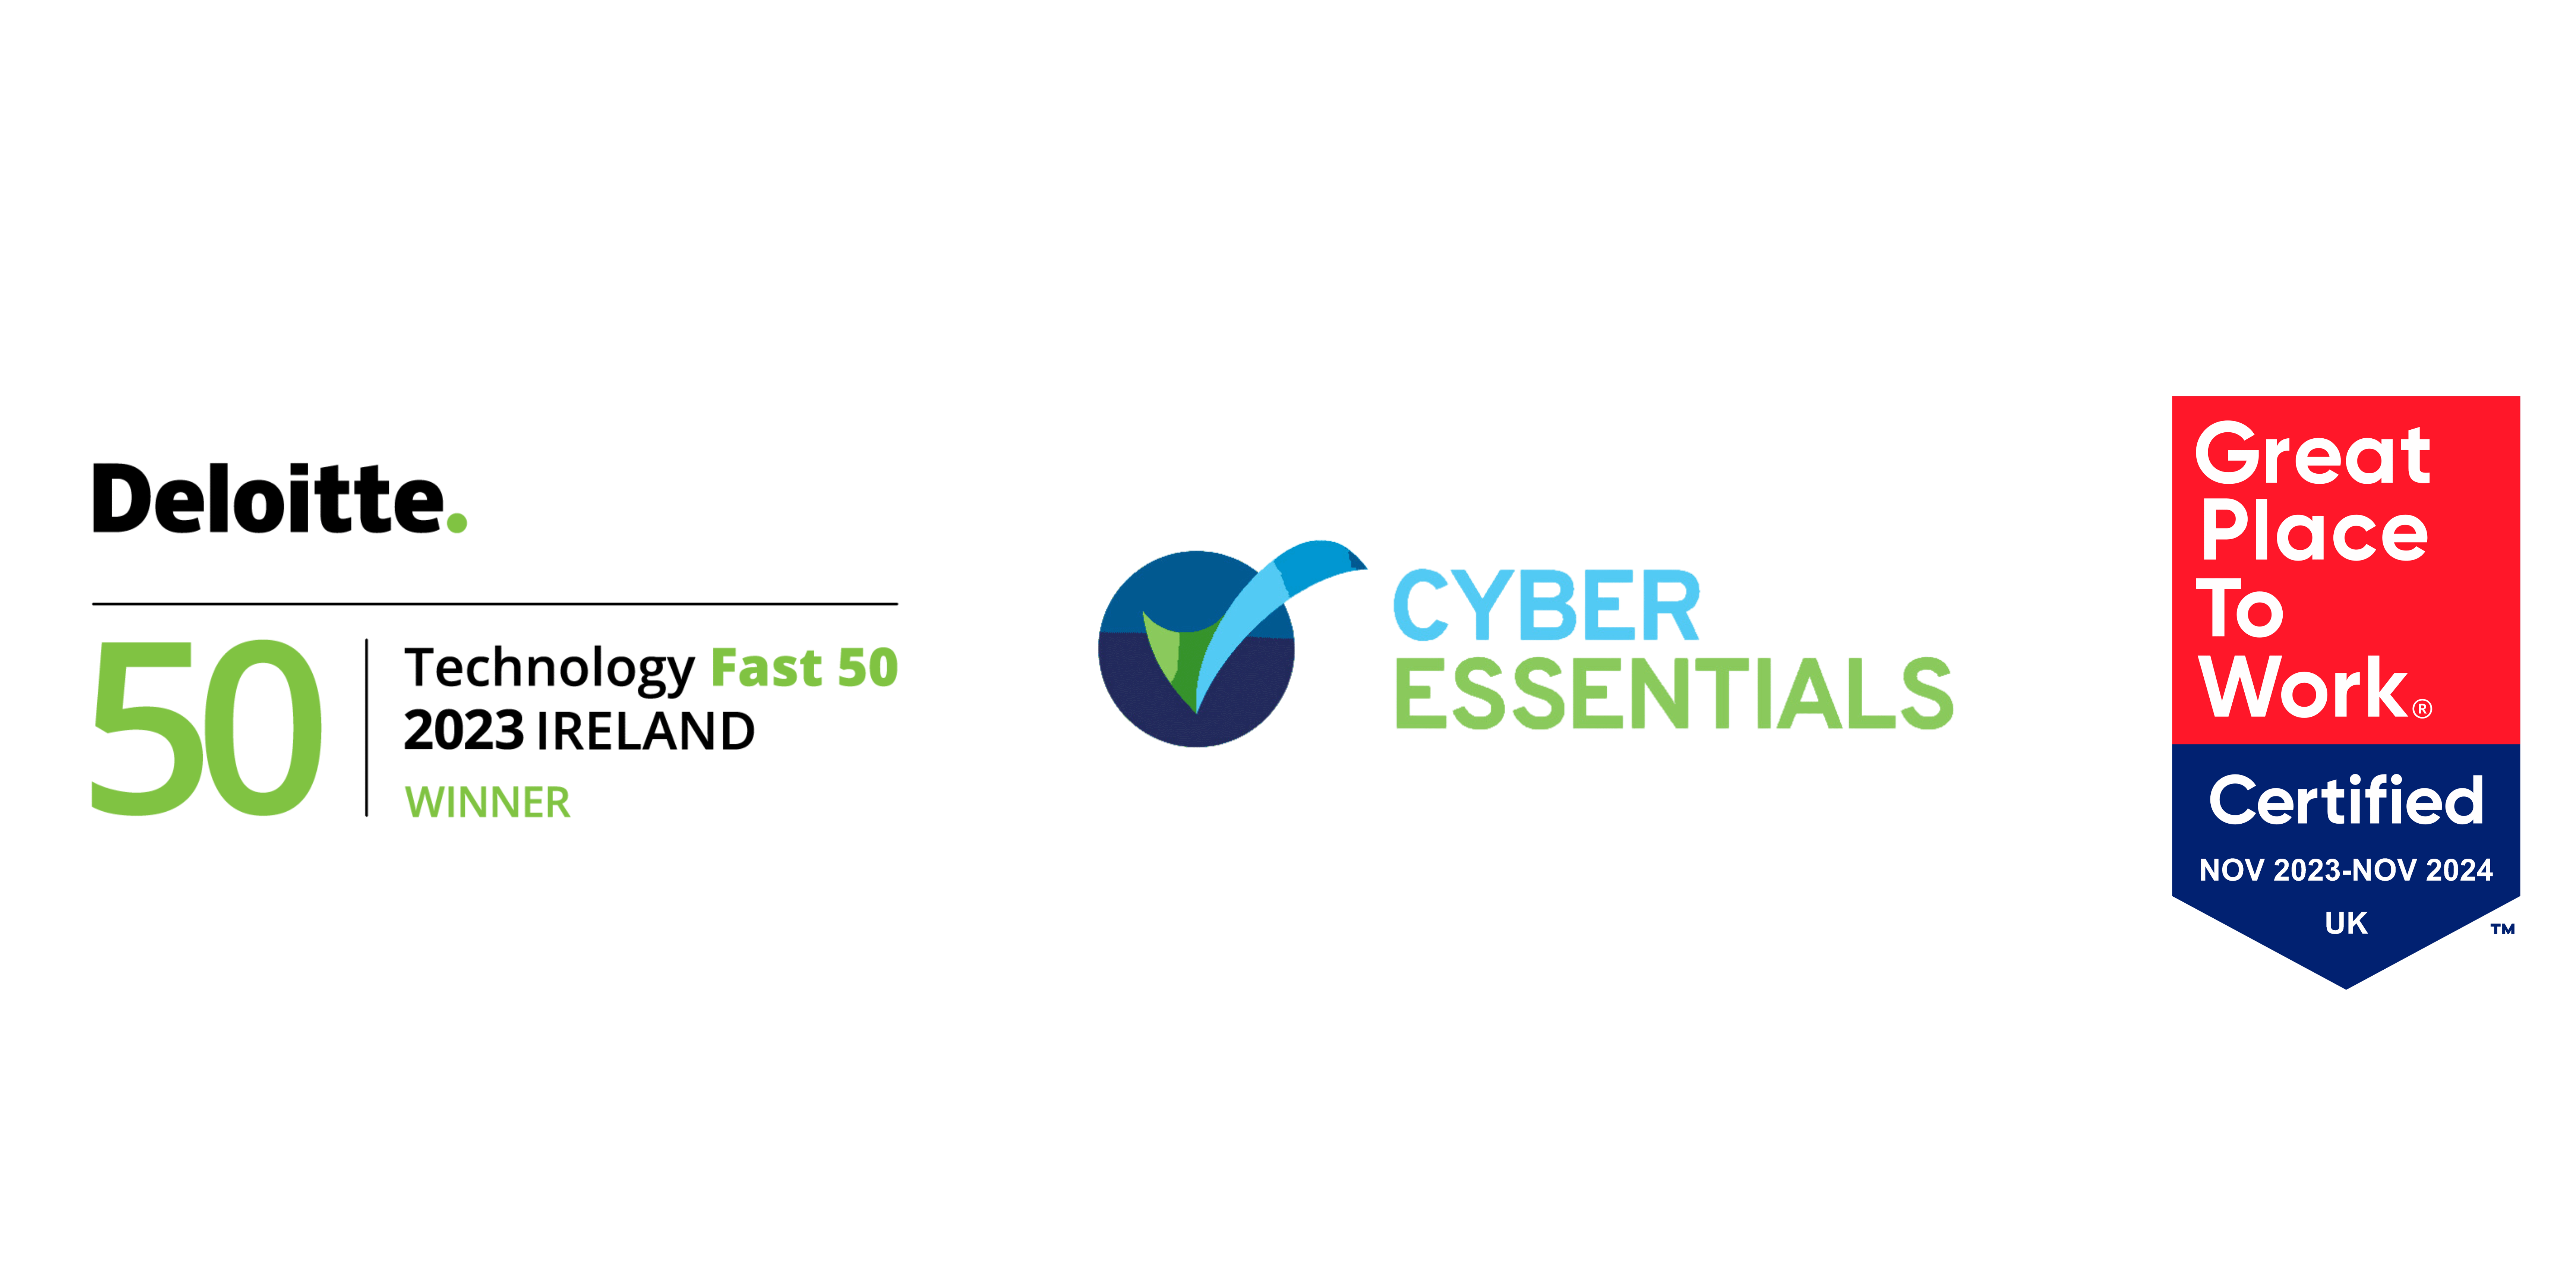 Deloitte Fast 50, Cyber Essentials, Great place to work (1)